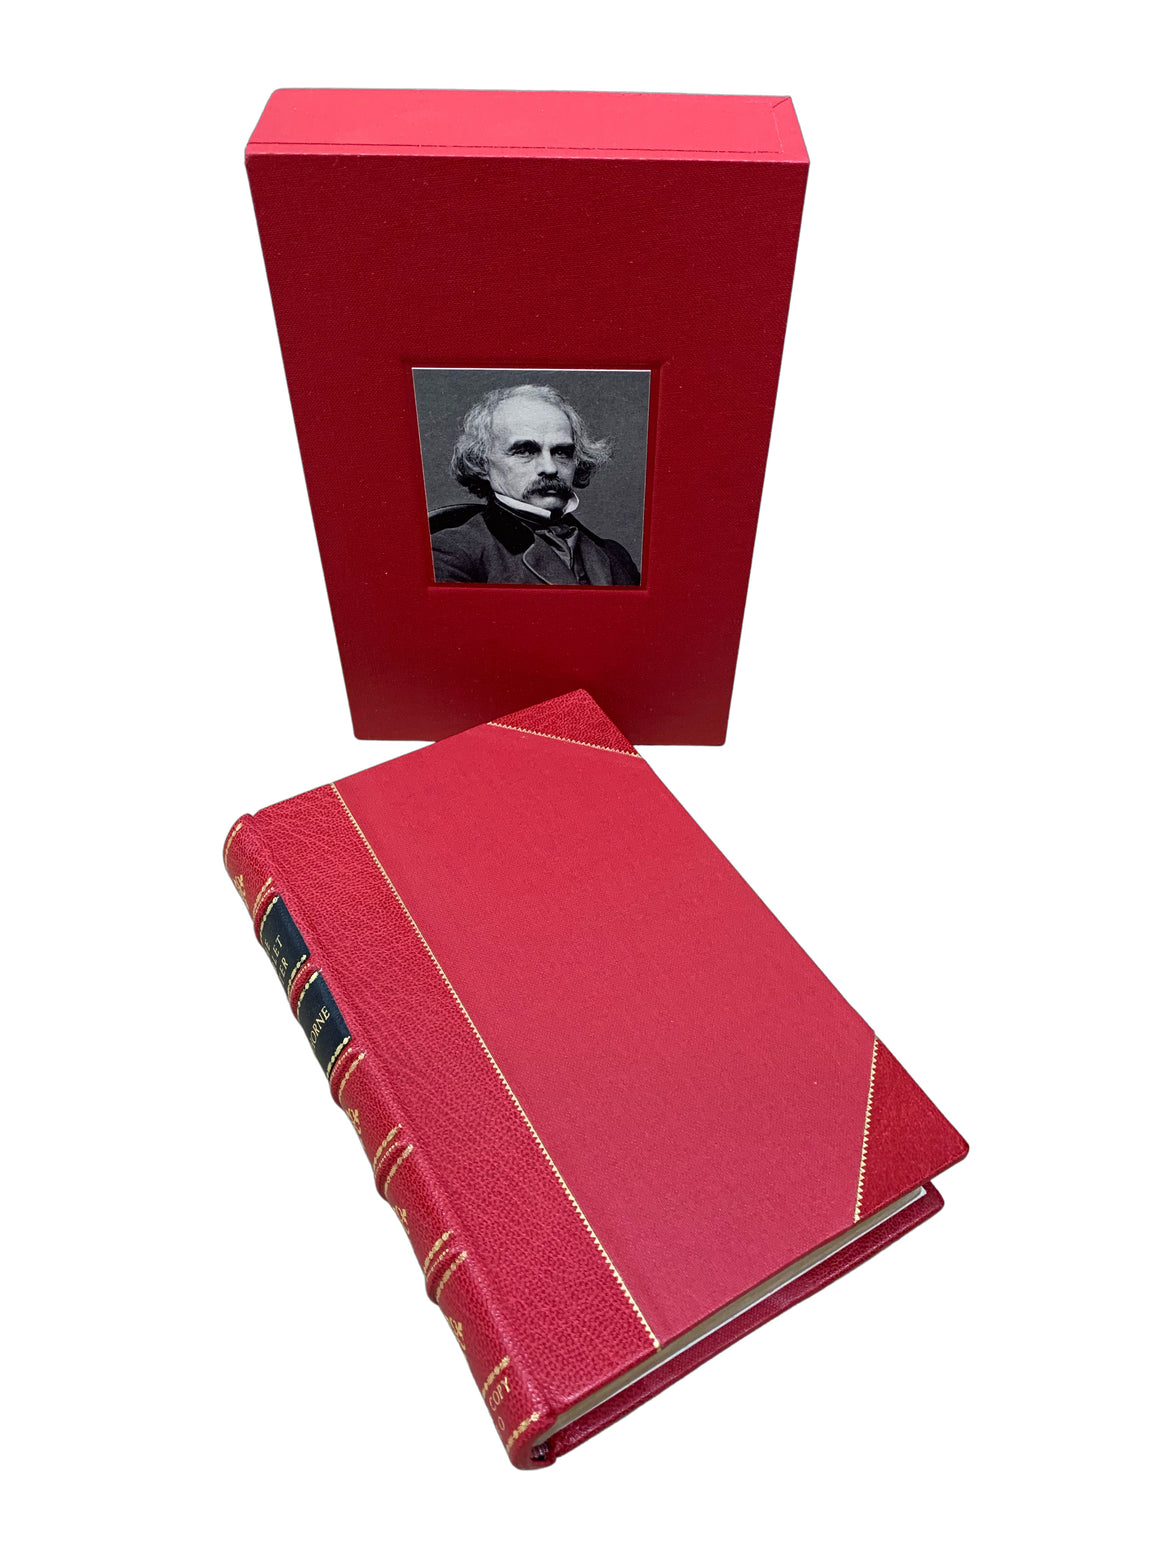 The Scarlet Letter: A Romance, by Nathaniel Hawthorne, Second Edition Printing, with Tipped-In Signature, 1850